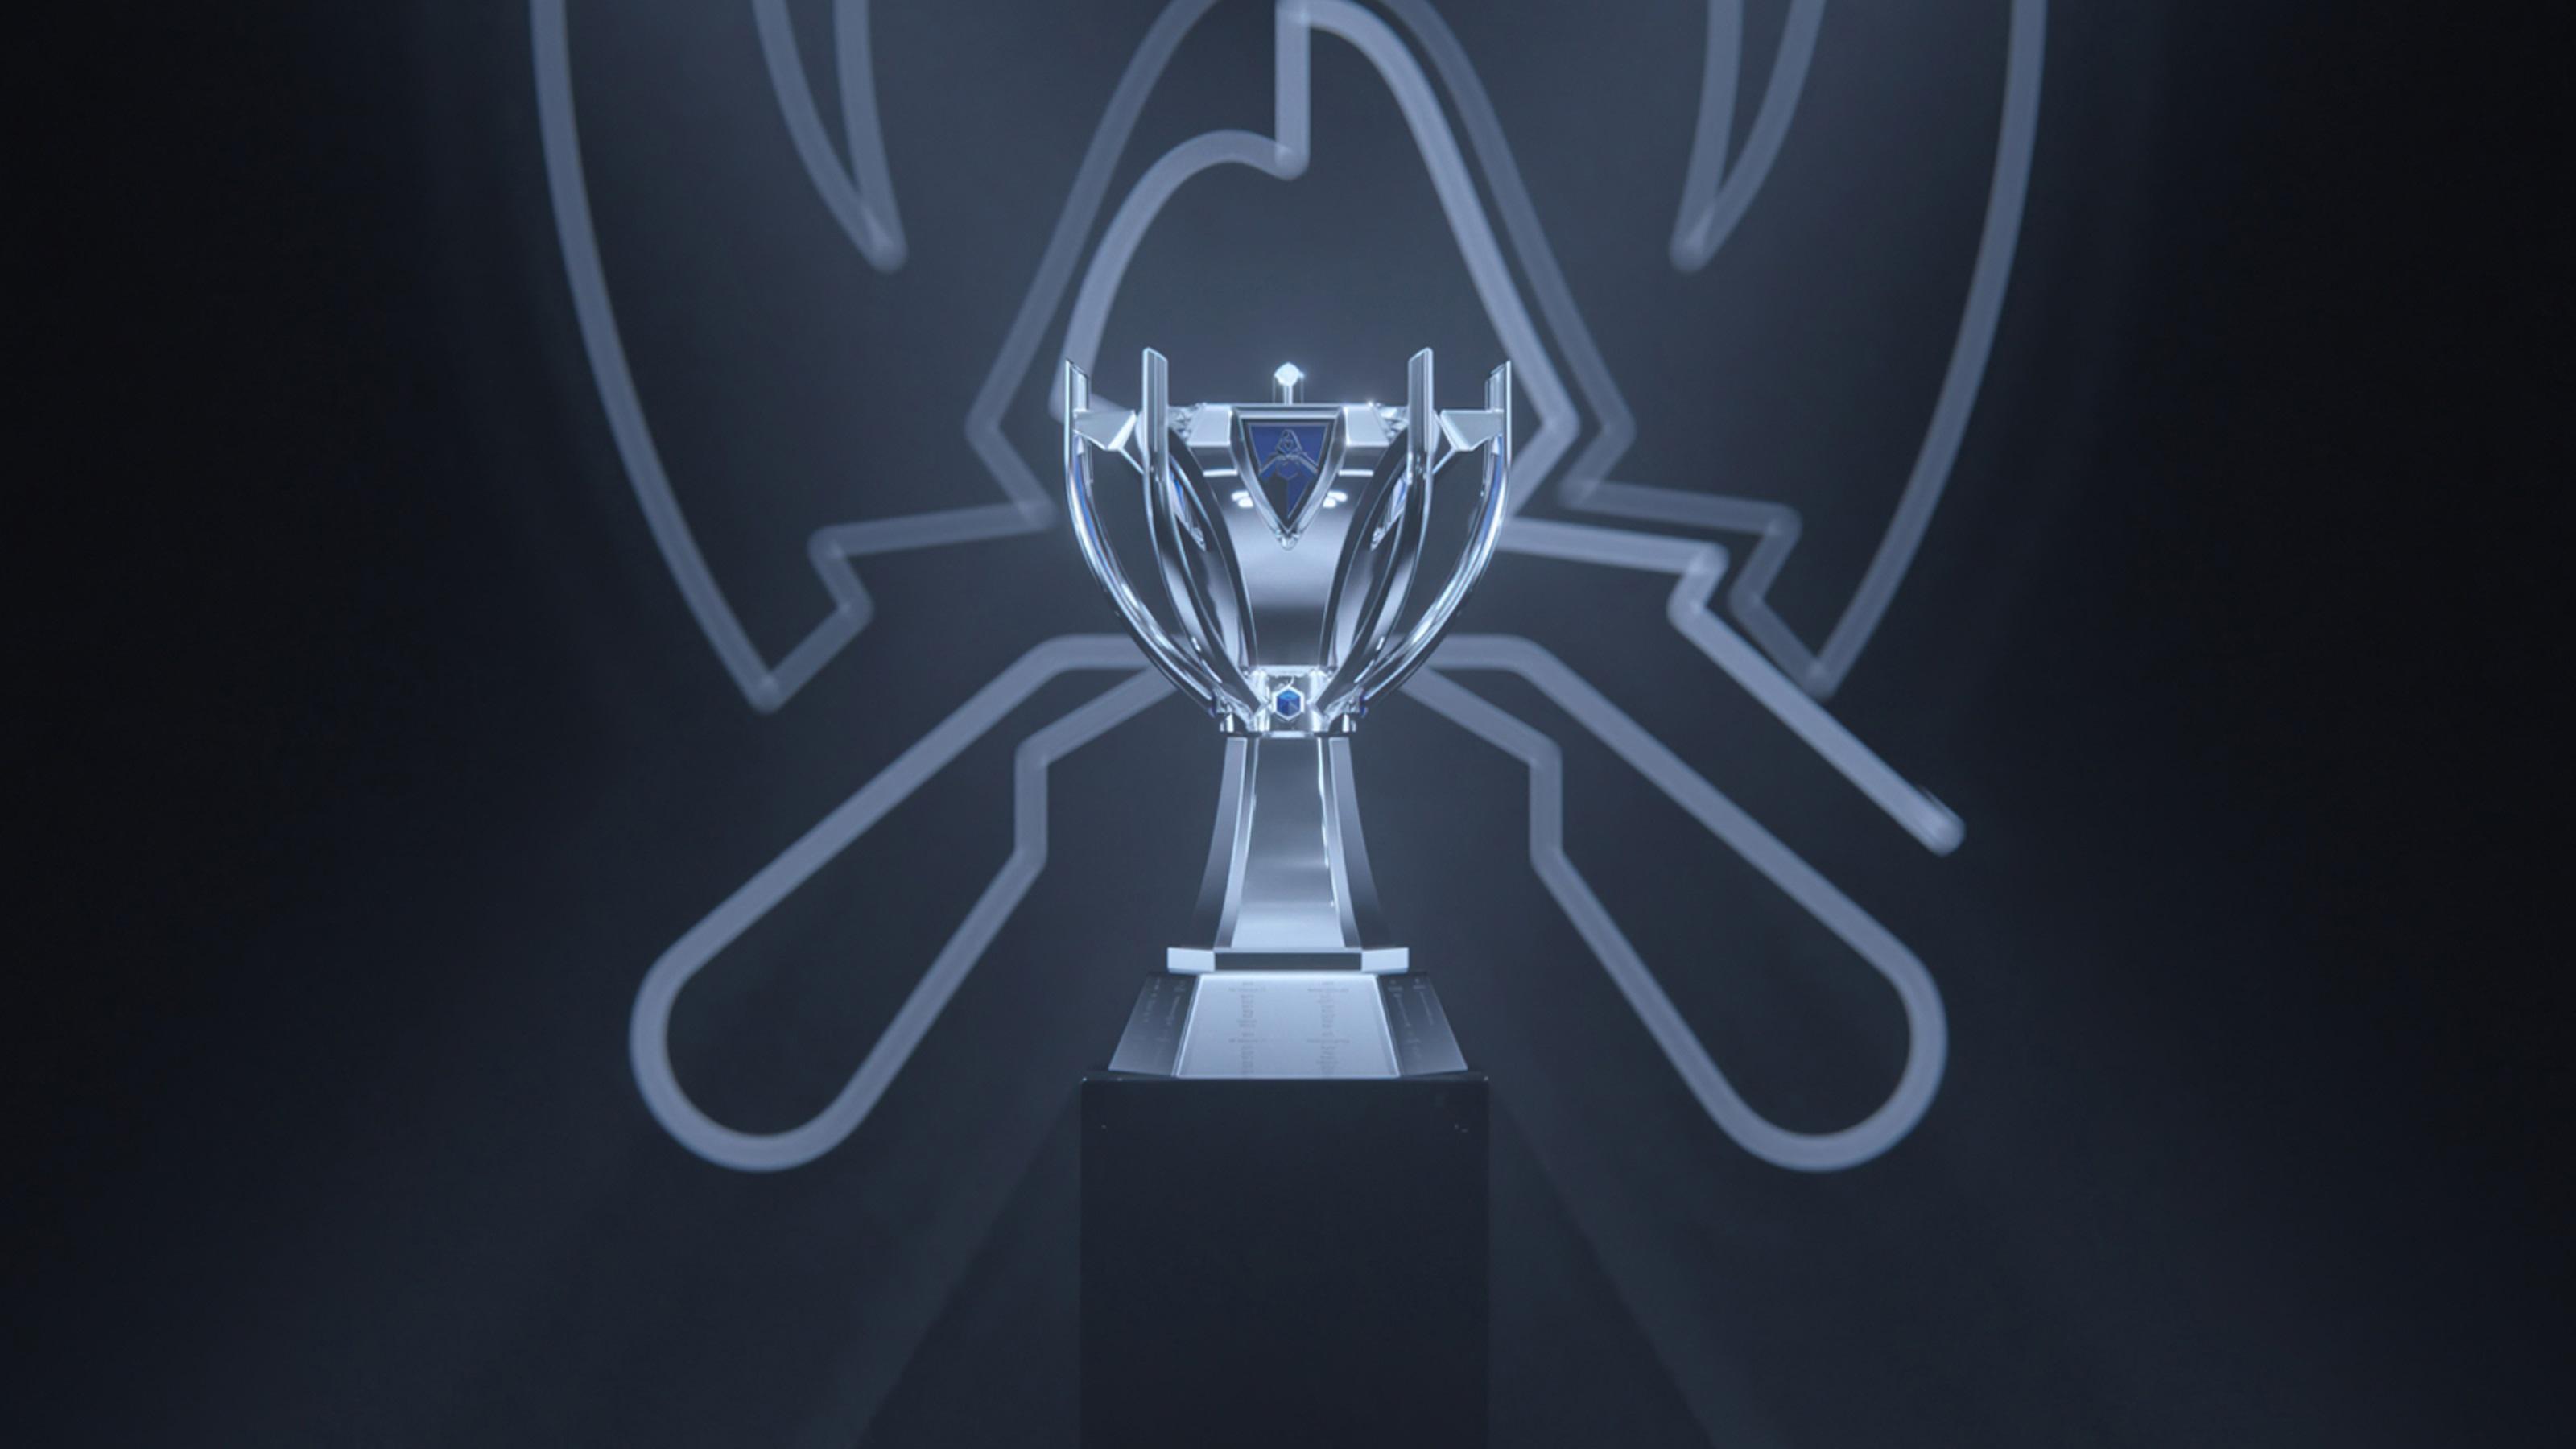 Esports: League of Legends Worlds 2023 to begin this week - The